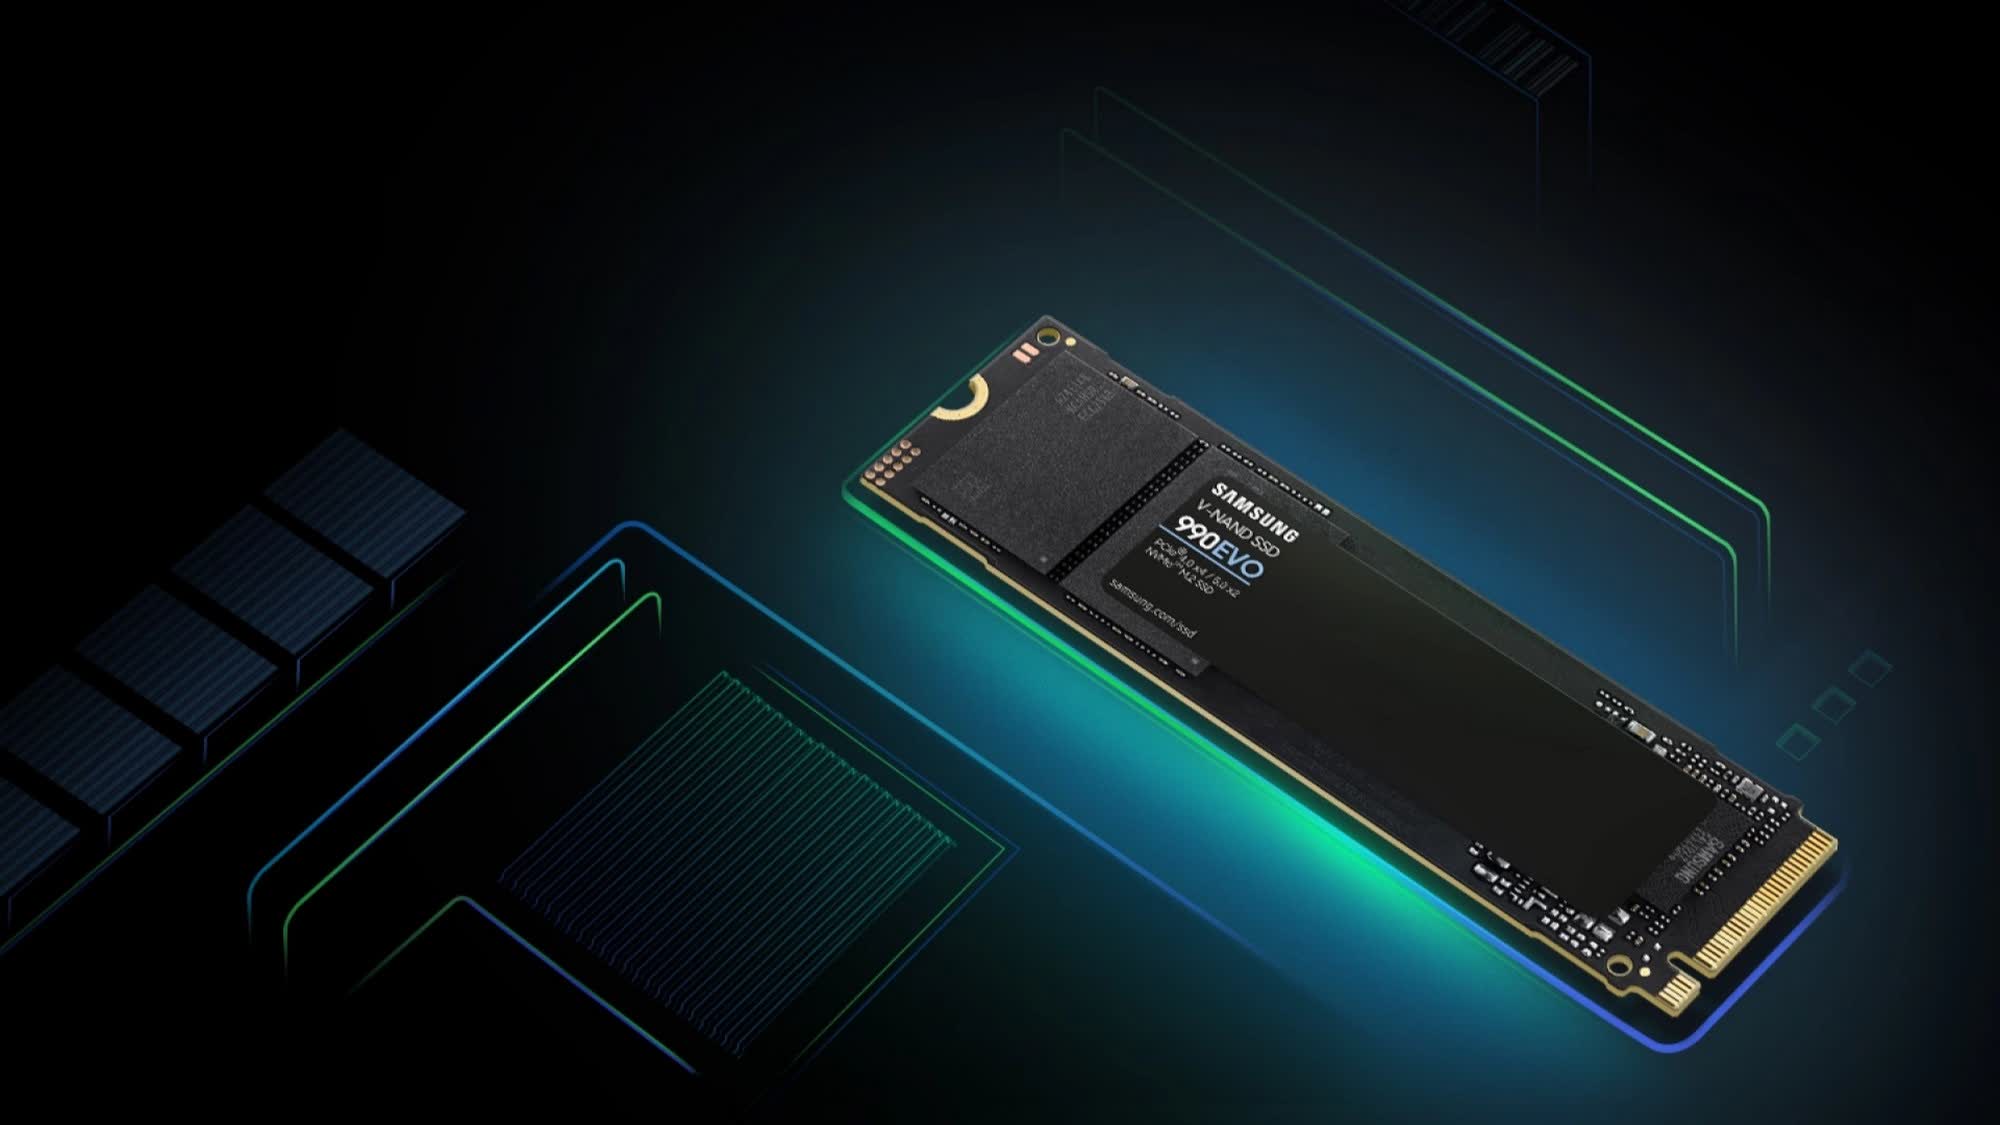 Samsung's 990 EVO SSD could support both PCIe 4.0 x4 and PCIe 5.0 x2